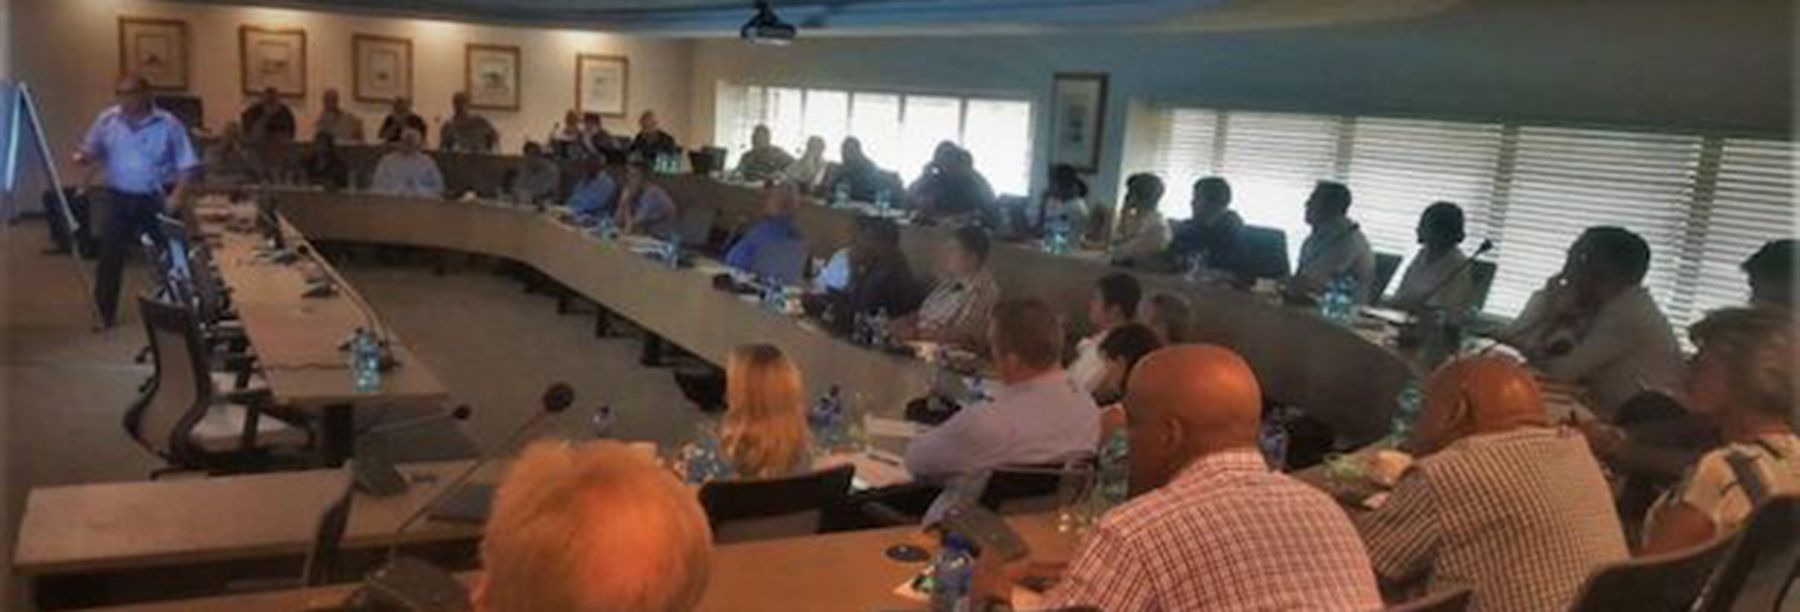 Automatic Numberplate Recognition Industry Workshop held in Johannesburg